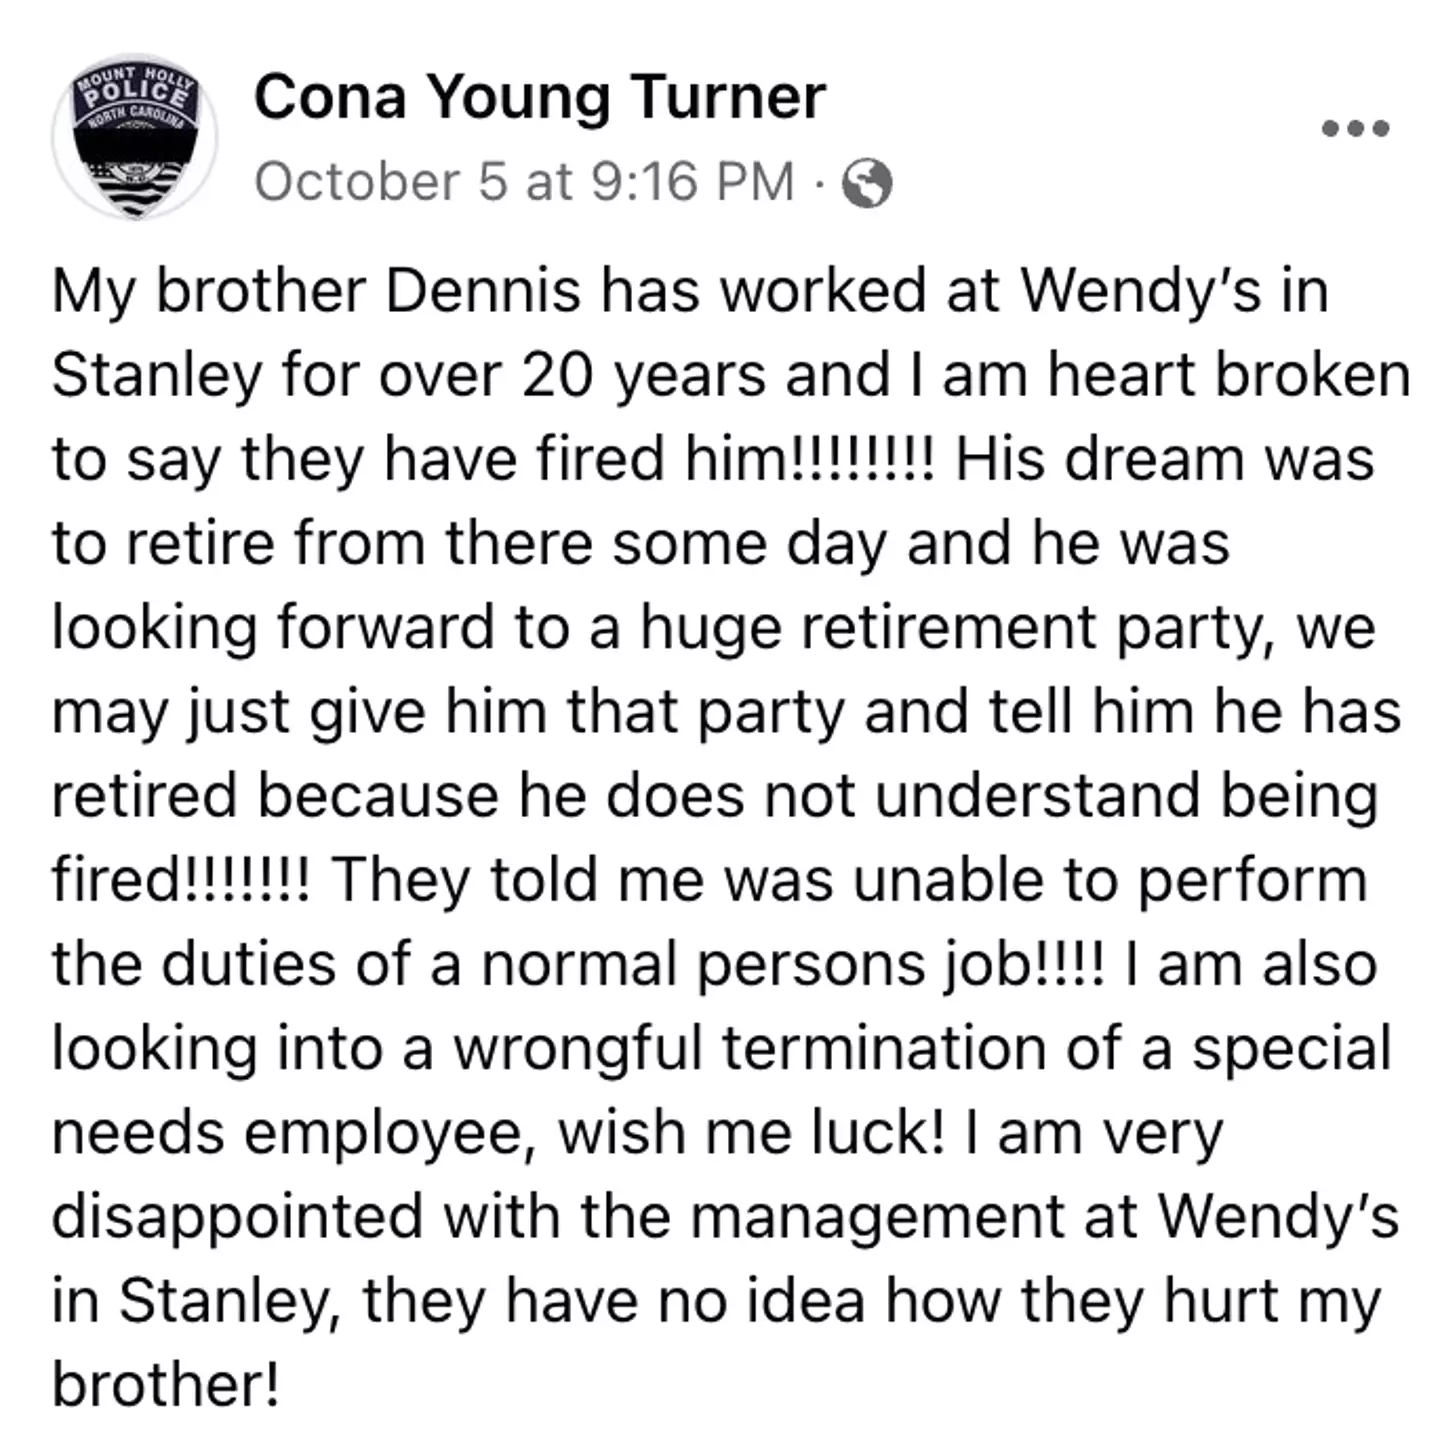 Dennis has decided not to return to Wendy's after being fired.